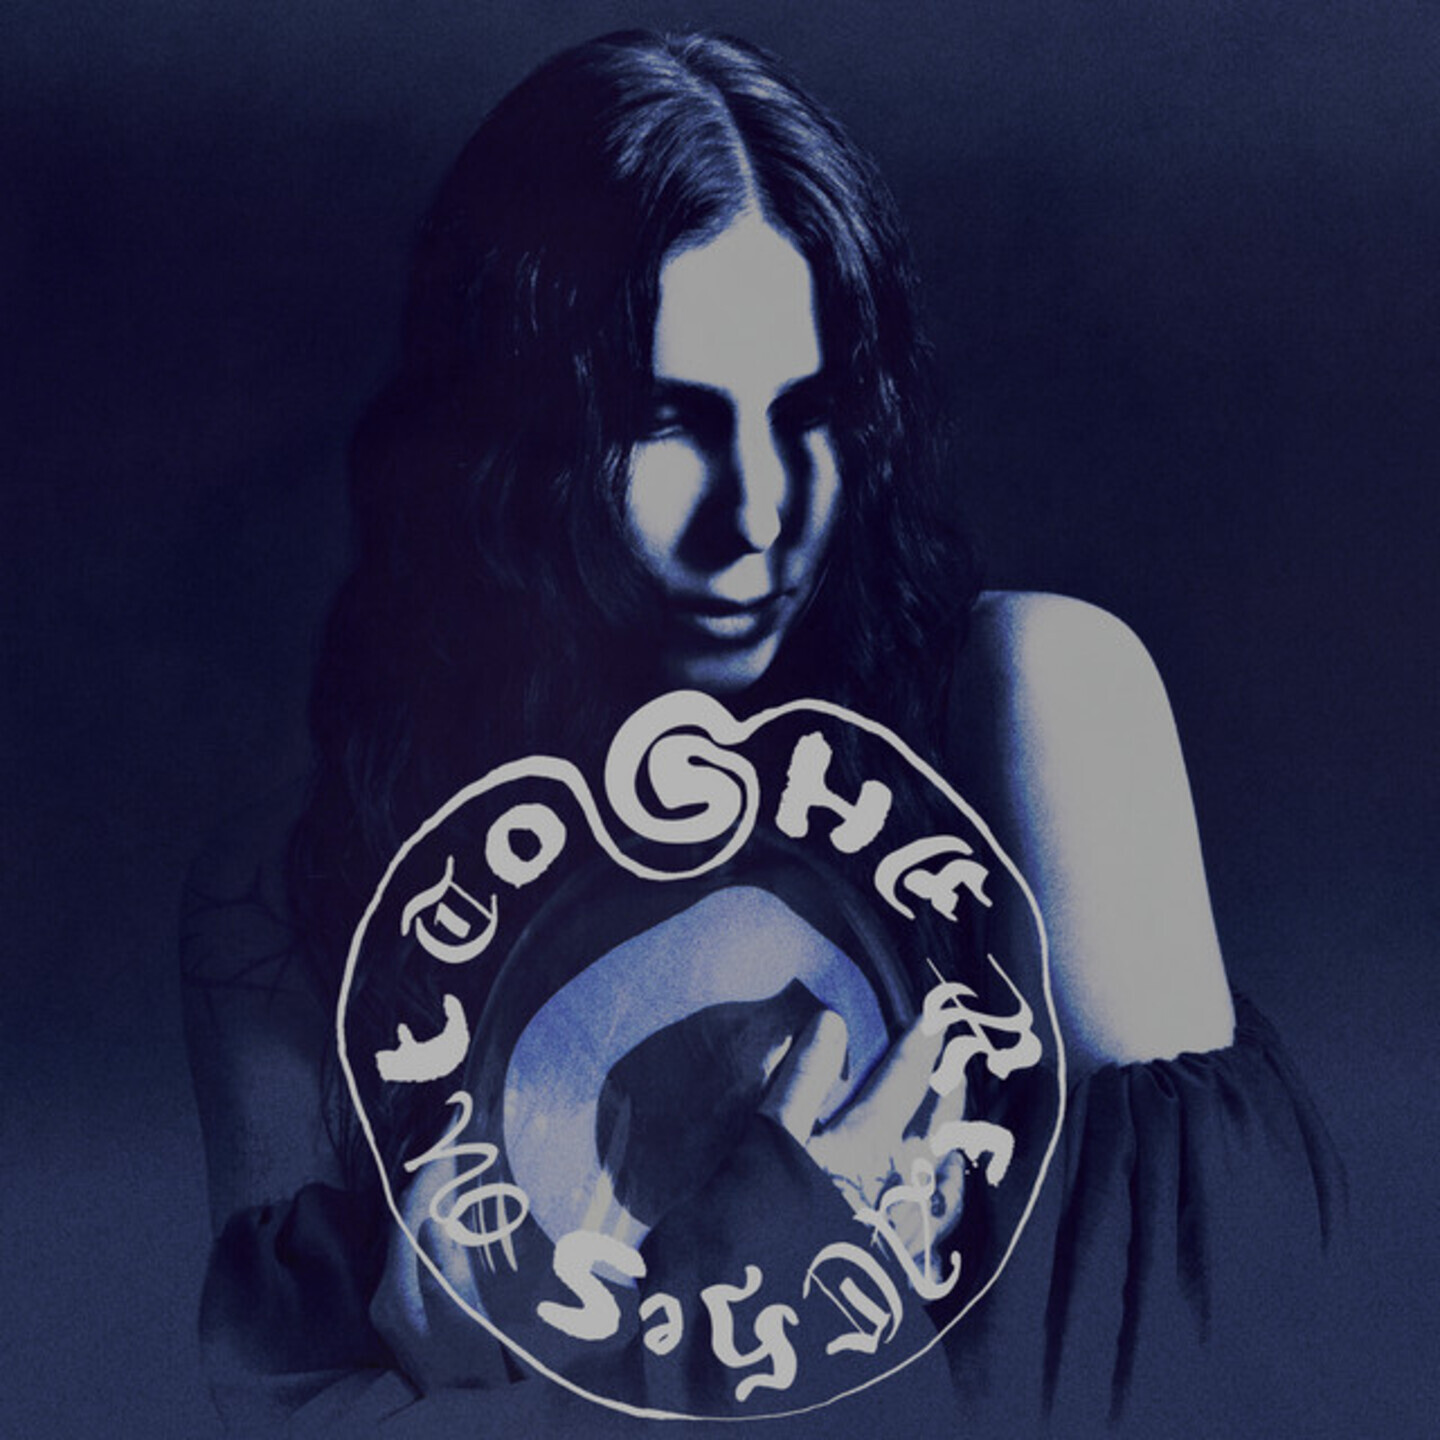 CHELSEA WOLFE - She Reaches Out To She Reaches Out To She LP (Indie Exclusive Blue vinyl)